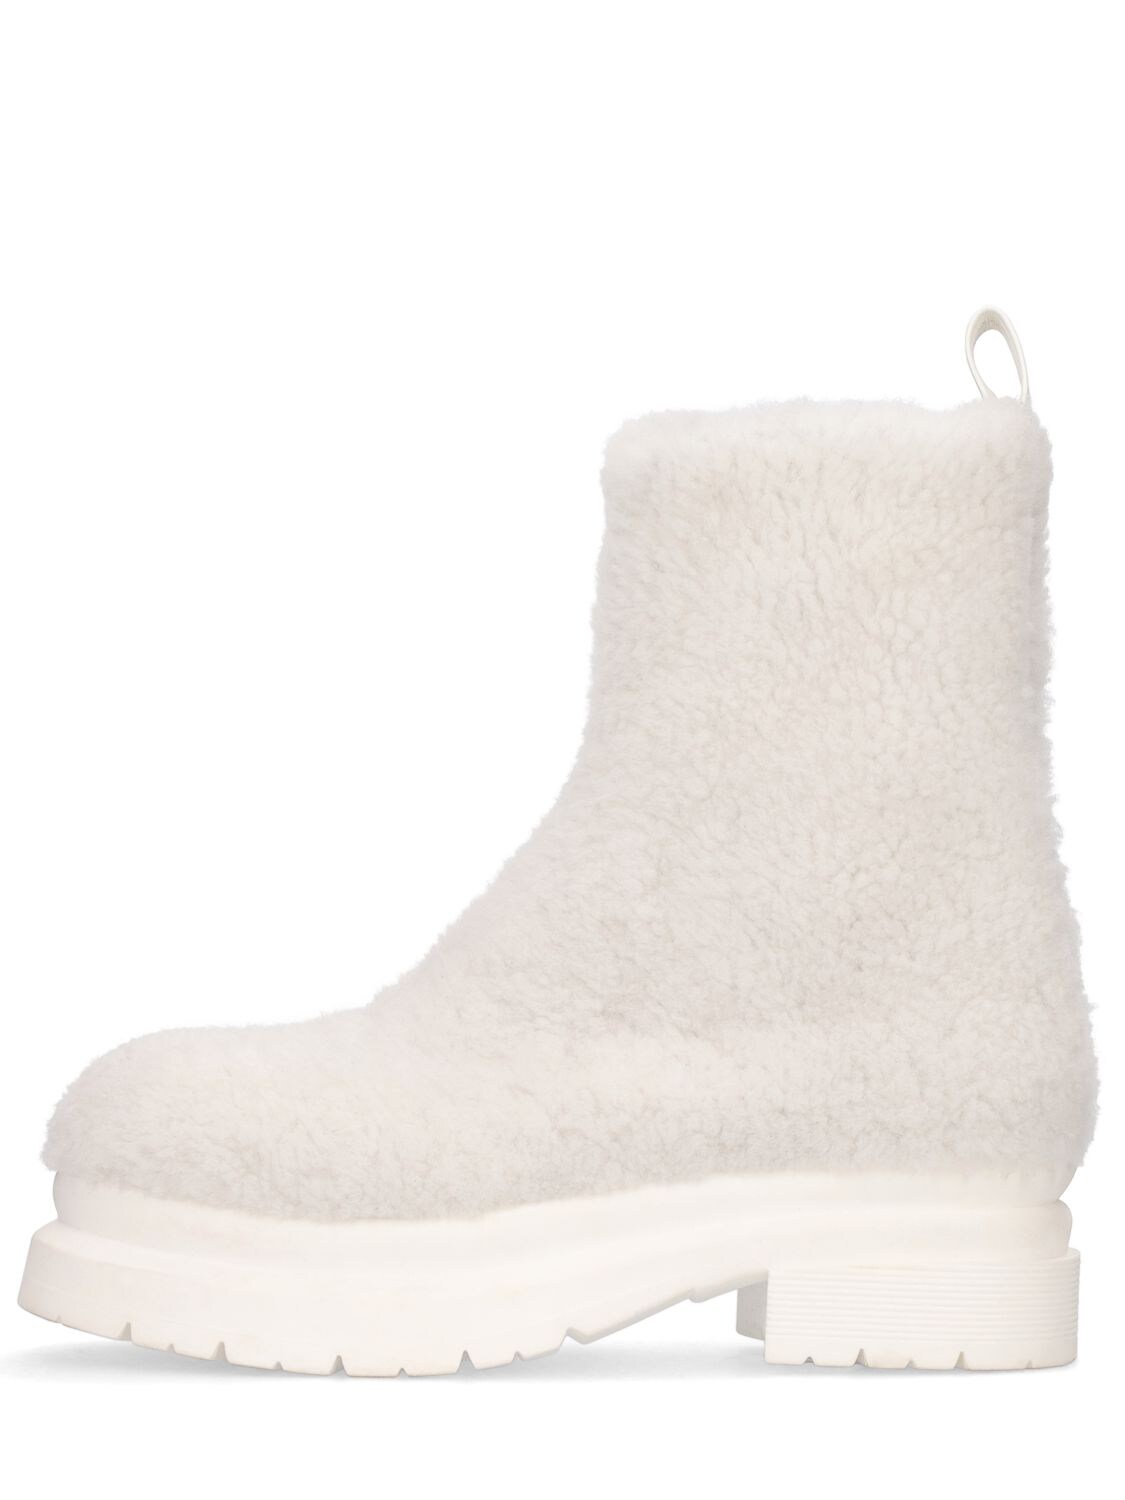 JW ANDERSON 20mm Fur Ankle Boots